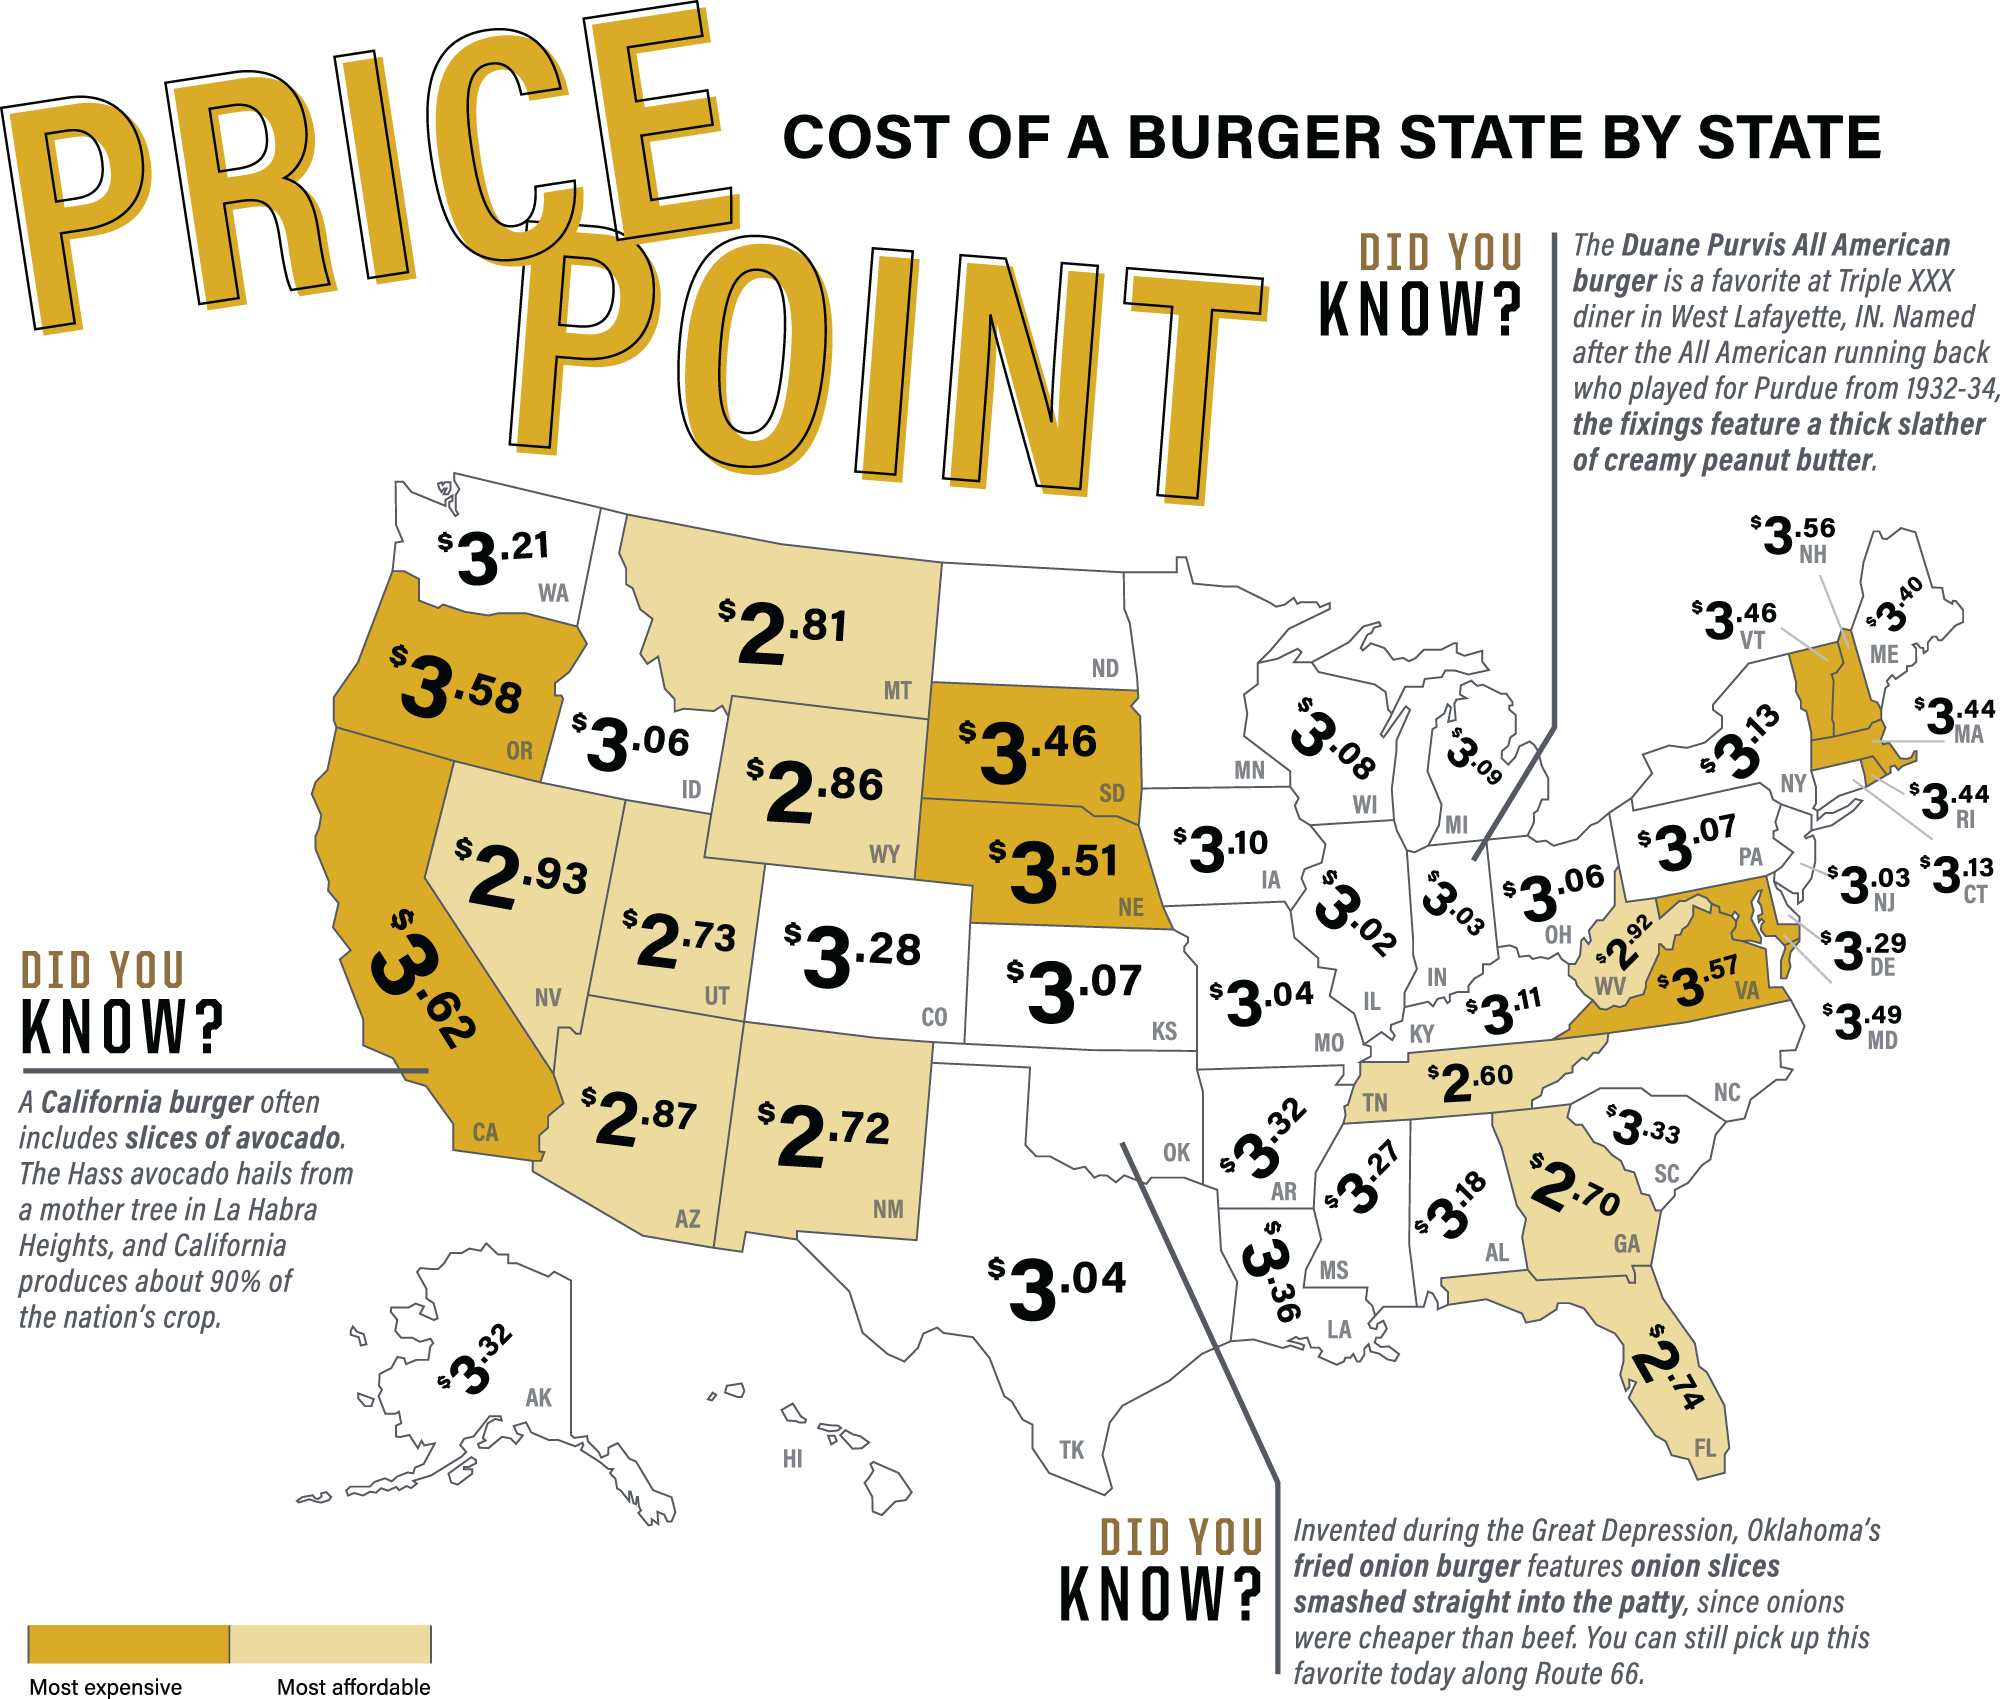 National average prices for a home-cooked burger by state, from highest to lowest, are as follows: California, $3.62; Oregon, $3.58; Virginia, $3.57; New Hampshire, $3.56; Nebraska, $3.51; Maryland, $3.49; Vermont, $3.46; South Dakota, $3.46; Massachusetts, $3.44; Rhode Island, $3.44; Maine, $3.40; Louisiana, $3.36; South Carolina, $3.33; Arkansas, $3.32; Alaska, $3.32; Delaware, $3.29; Colorado, $3.28; Mississippi, $3.27; Washington, $3.21; Alabama, $3.18; New York, $3.13; Connecticut, $3.13; Kentucky, $3.11; Iowa, $3.10; Michigan, $3.09; Wisconsin, $3.08; Kansas, $3.07; Pennsylvania, $3.07; Idaho, $3.06; Ohio, $3.06; Texas, $3.04; Missouri, $3.04; Indiana, $3.03; New Jersey, $3.03; Illinois, $3.02; Nevada, $2.93; West Virginia, $2.92; Arizona, $2.87; Wyoming, $2.86; Montana, $2.81; Florida, $2.74; Utah, $2.73; New Mexico, $2.72; Georgia, $2.70; Tennessee, $2.60. Did you know? – IN The Duane Purvis All-American cheeseburger is a favorite at Triple XXX diner in West Lafayette, IN. Named after the All-American running back who played for Purdue from 1932-34, the fixings feature a thick slather of creamy peanut butter. Did you know? - OK Invented during the Great Depression, Oklahoma’s fried onion burger features onion slices smashed straight into the patty, since onions were cheaper than beef. You can still pick up this favorite today along Route 66. Did you know? - CA A California burger often includes slices of avocado. The Hass avocado hails from a mother tree in La Habra Heights, and California produces about 90% of the nation’s crop.